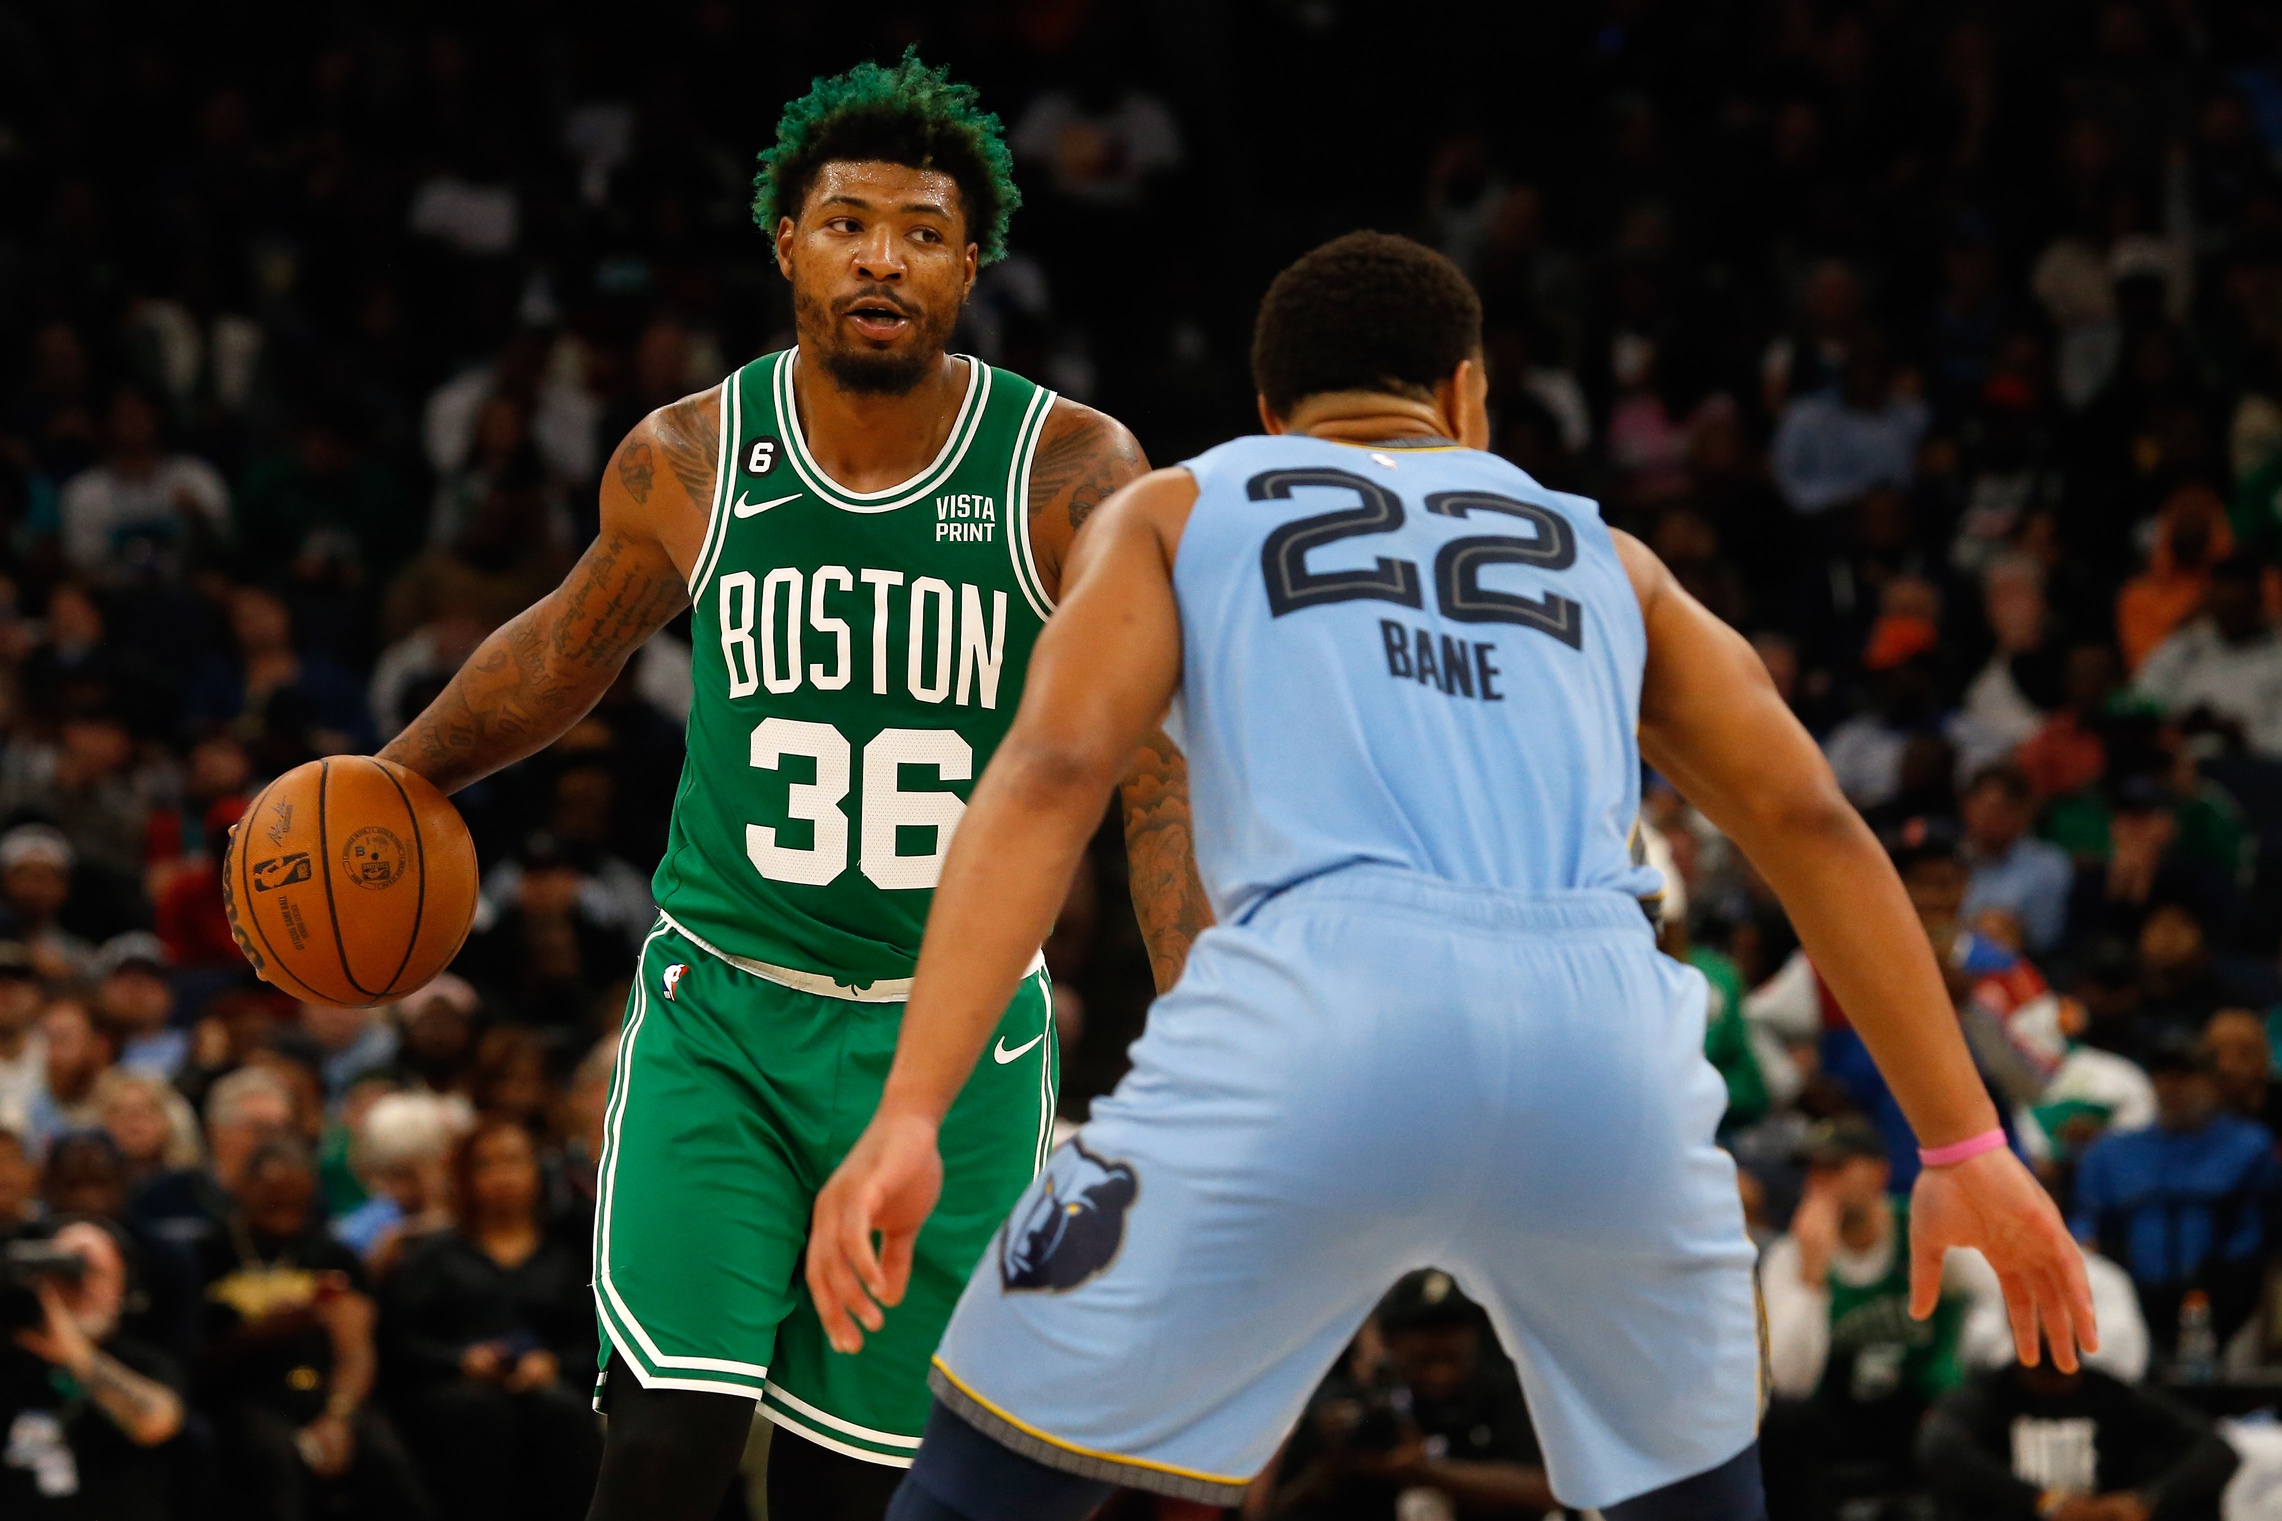 Nov 7, 2022; Memphis, Tennessee, USA; Boston Celtics guard Marcus Smart (36) dribbles during the second half against the Memphis Grizzlies at FedExForum. Mandatory Credit: Petre Thomas-USA TODAY Sports